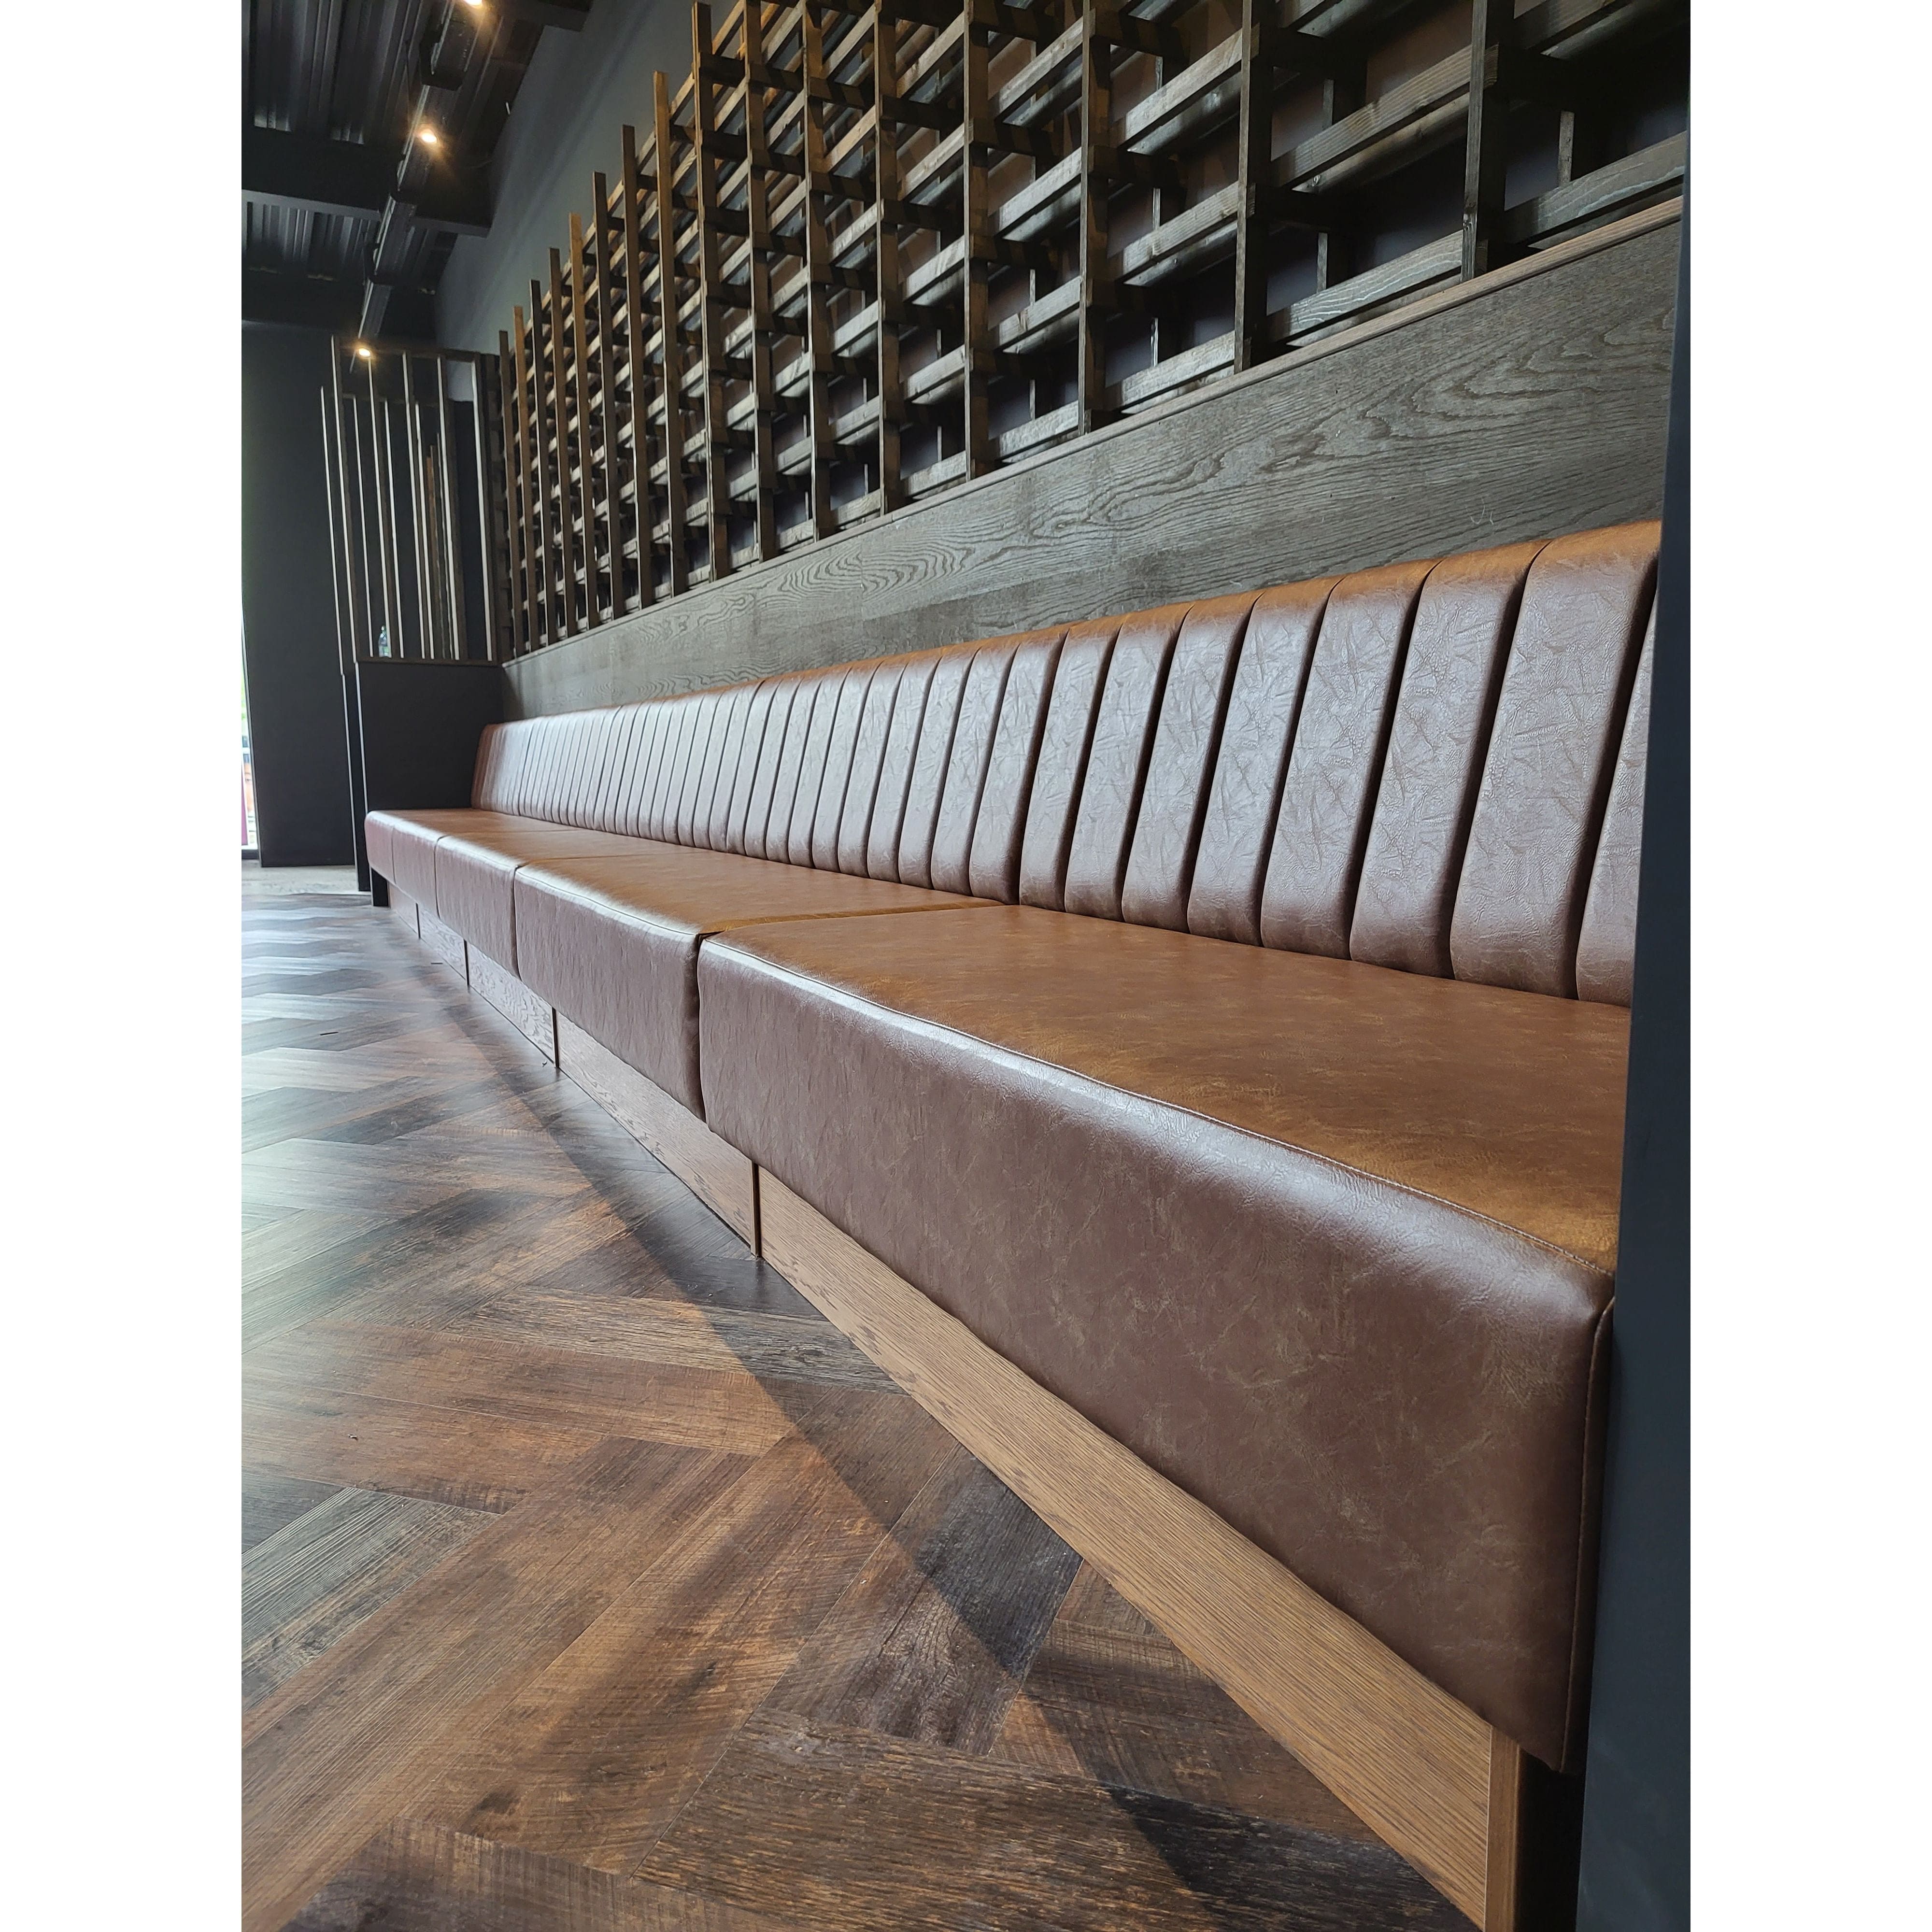 Restaurant Booth Seating